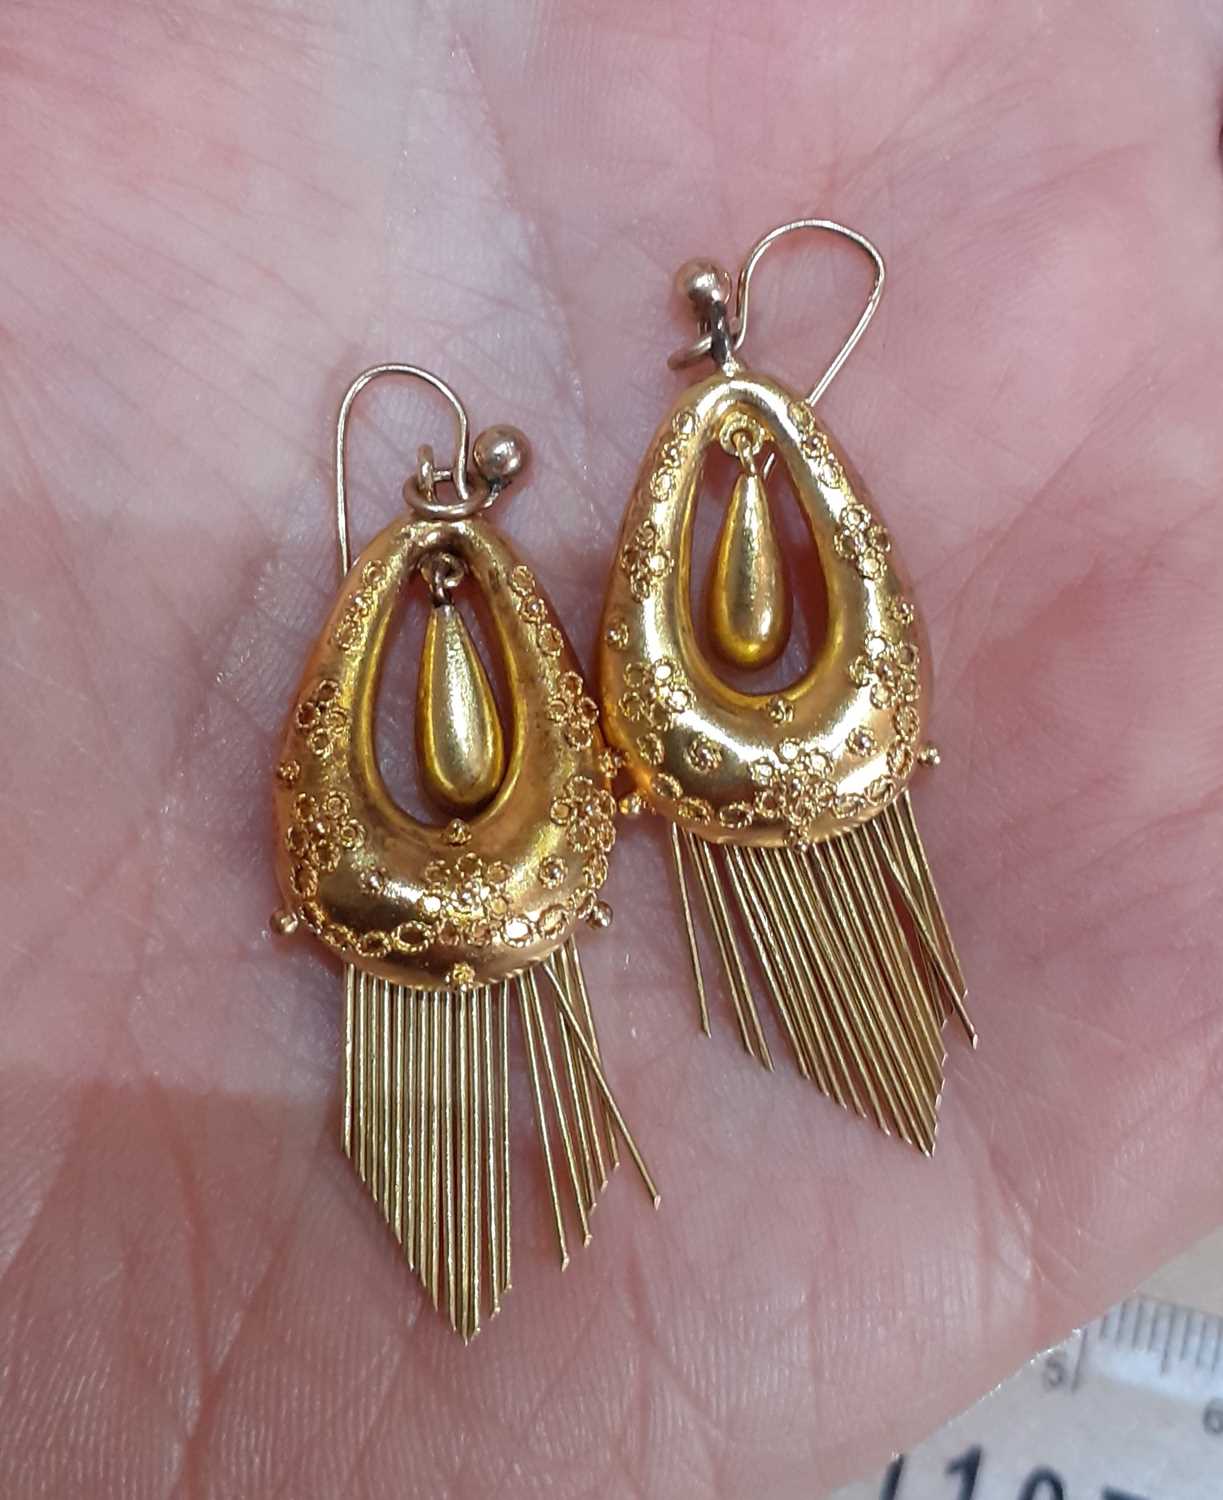 A Pair of Victorian Drop Earrings of pear shaped openwork form, with fringe and cannetille - Image 2 of 4